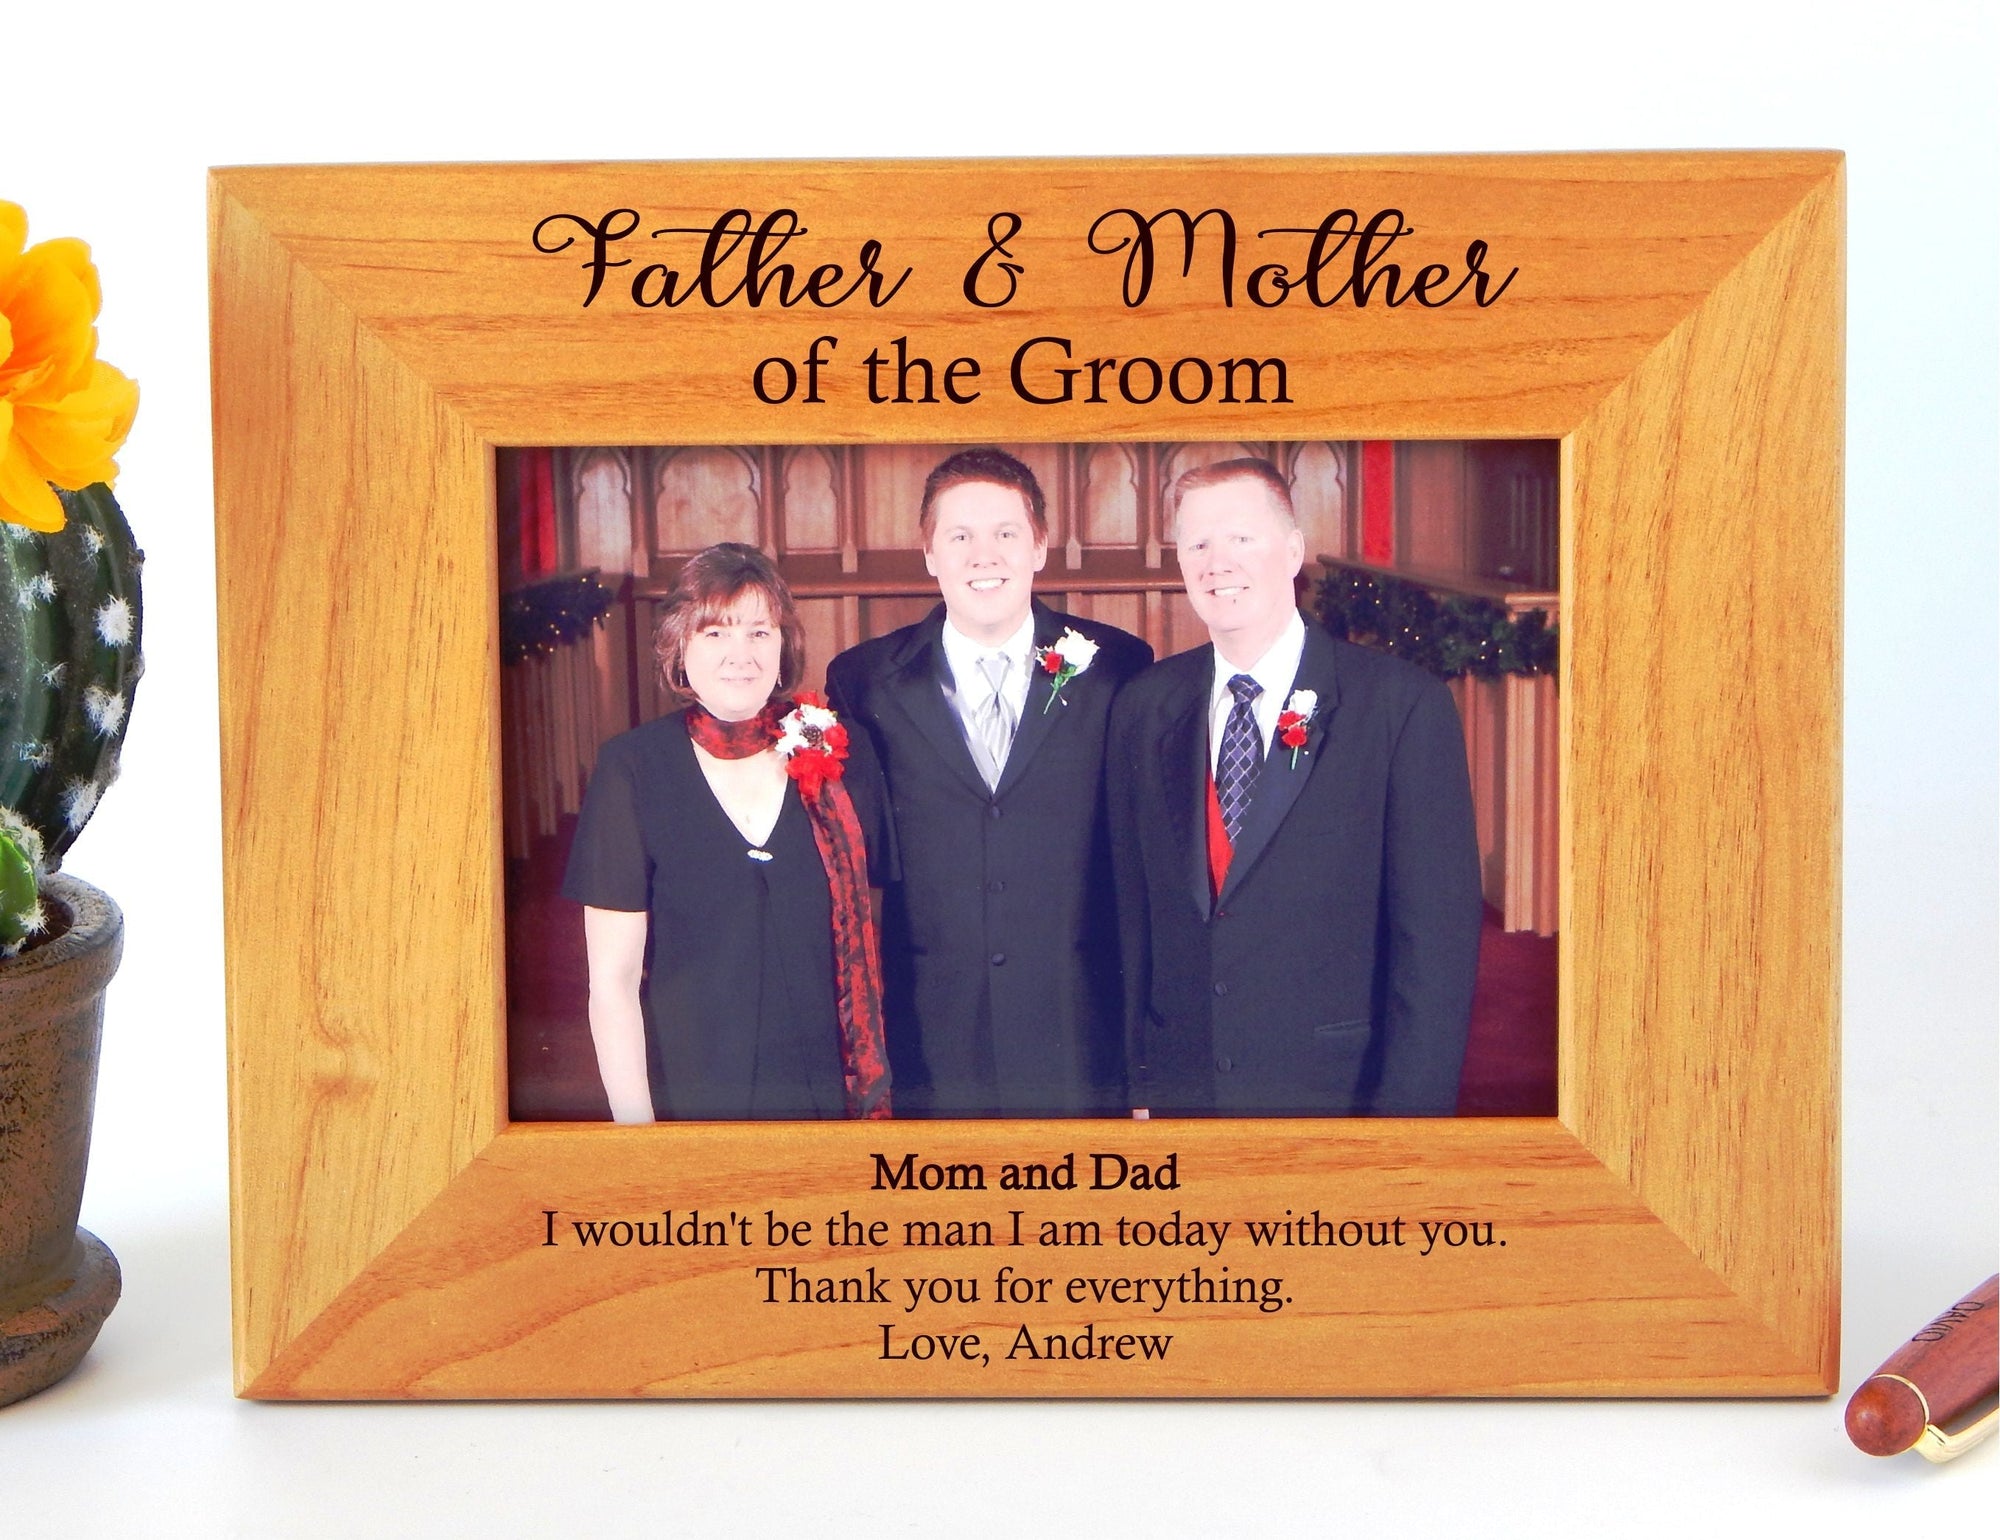 Engraved Picture Frames | Custom Photo Frame Gift for Wedding 4x6 5x7 Personalized